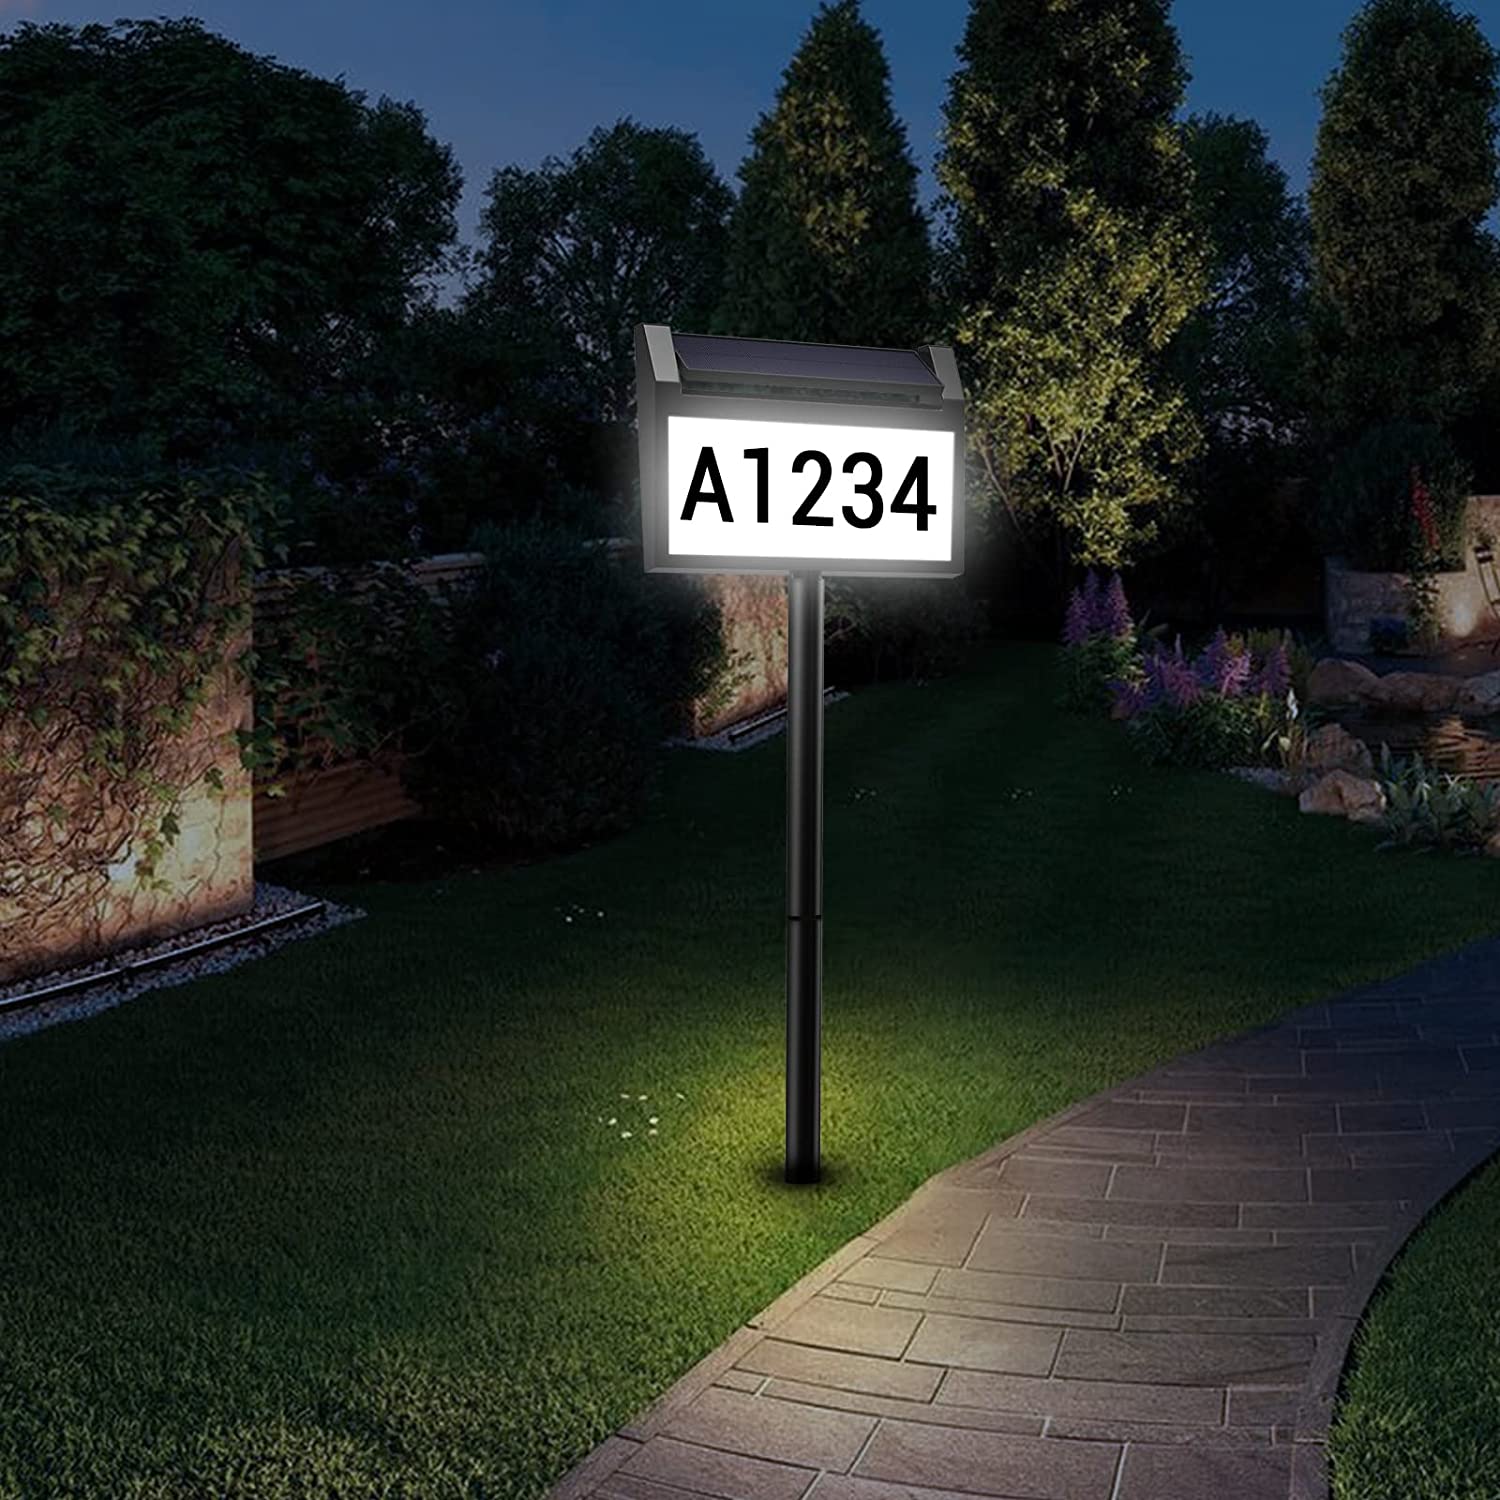 Solar House Number Sign, deerdance LED Illuminated Outdoor Address Plaque with Smart Control, 3-Color in 1 Waterproof Solar Powered House Number Light with Stakes for Outside Home, Yard, Street, House